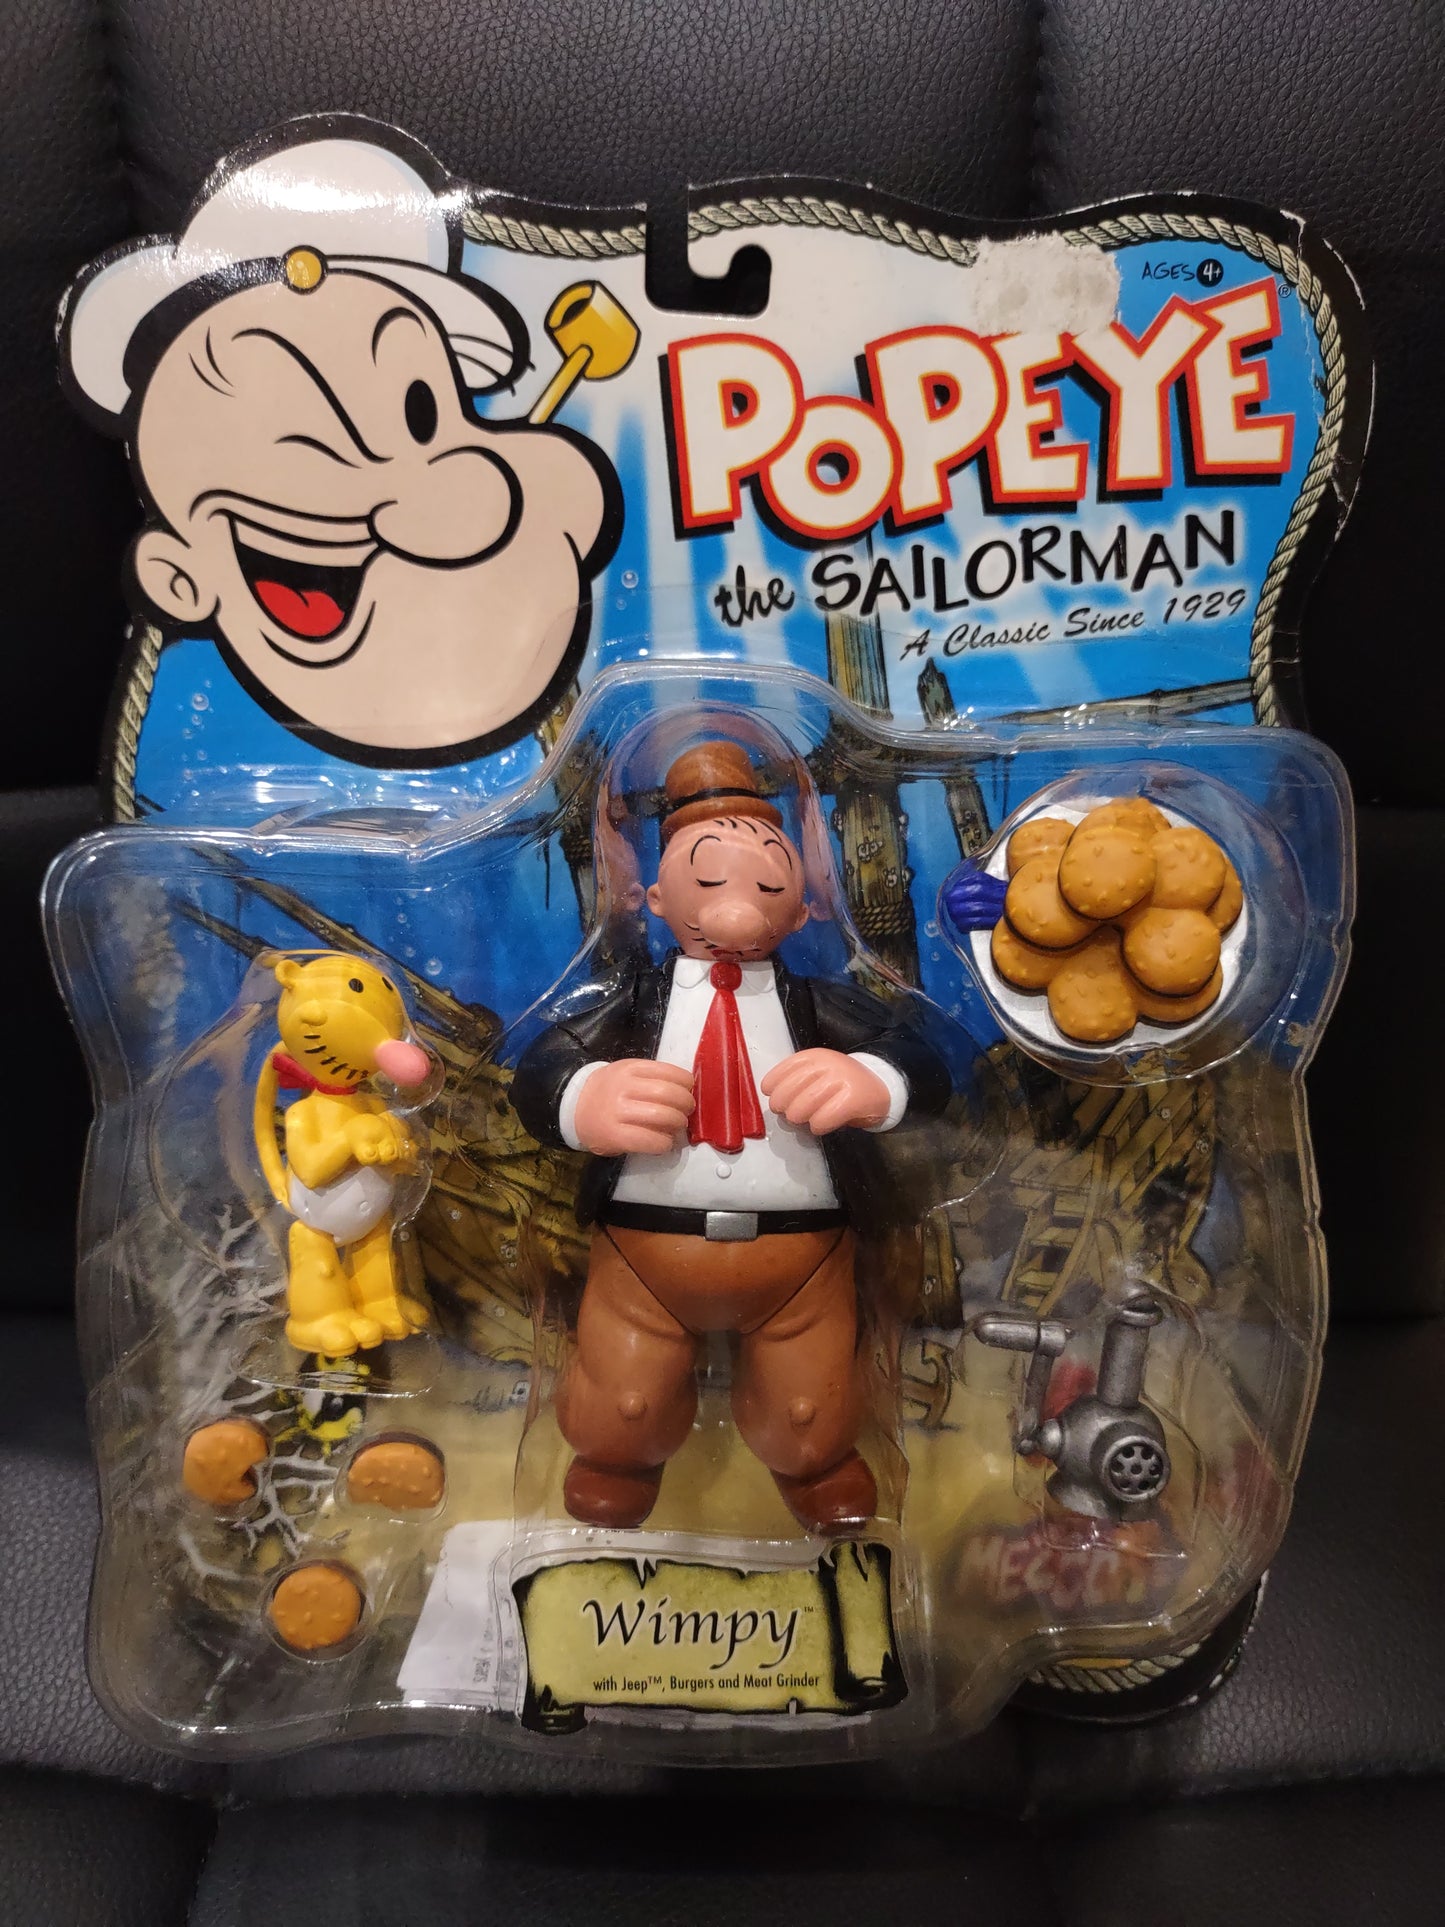 Action figure mezco popeye the sailorman wimpy with jeep burgers and meat grinder